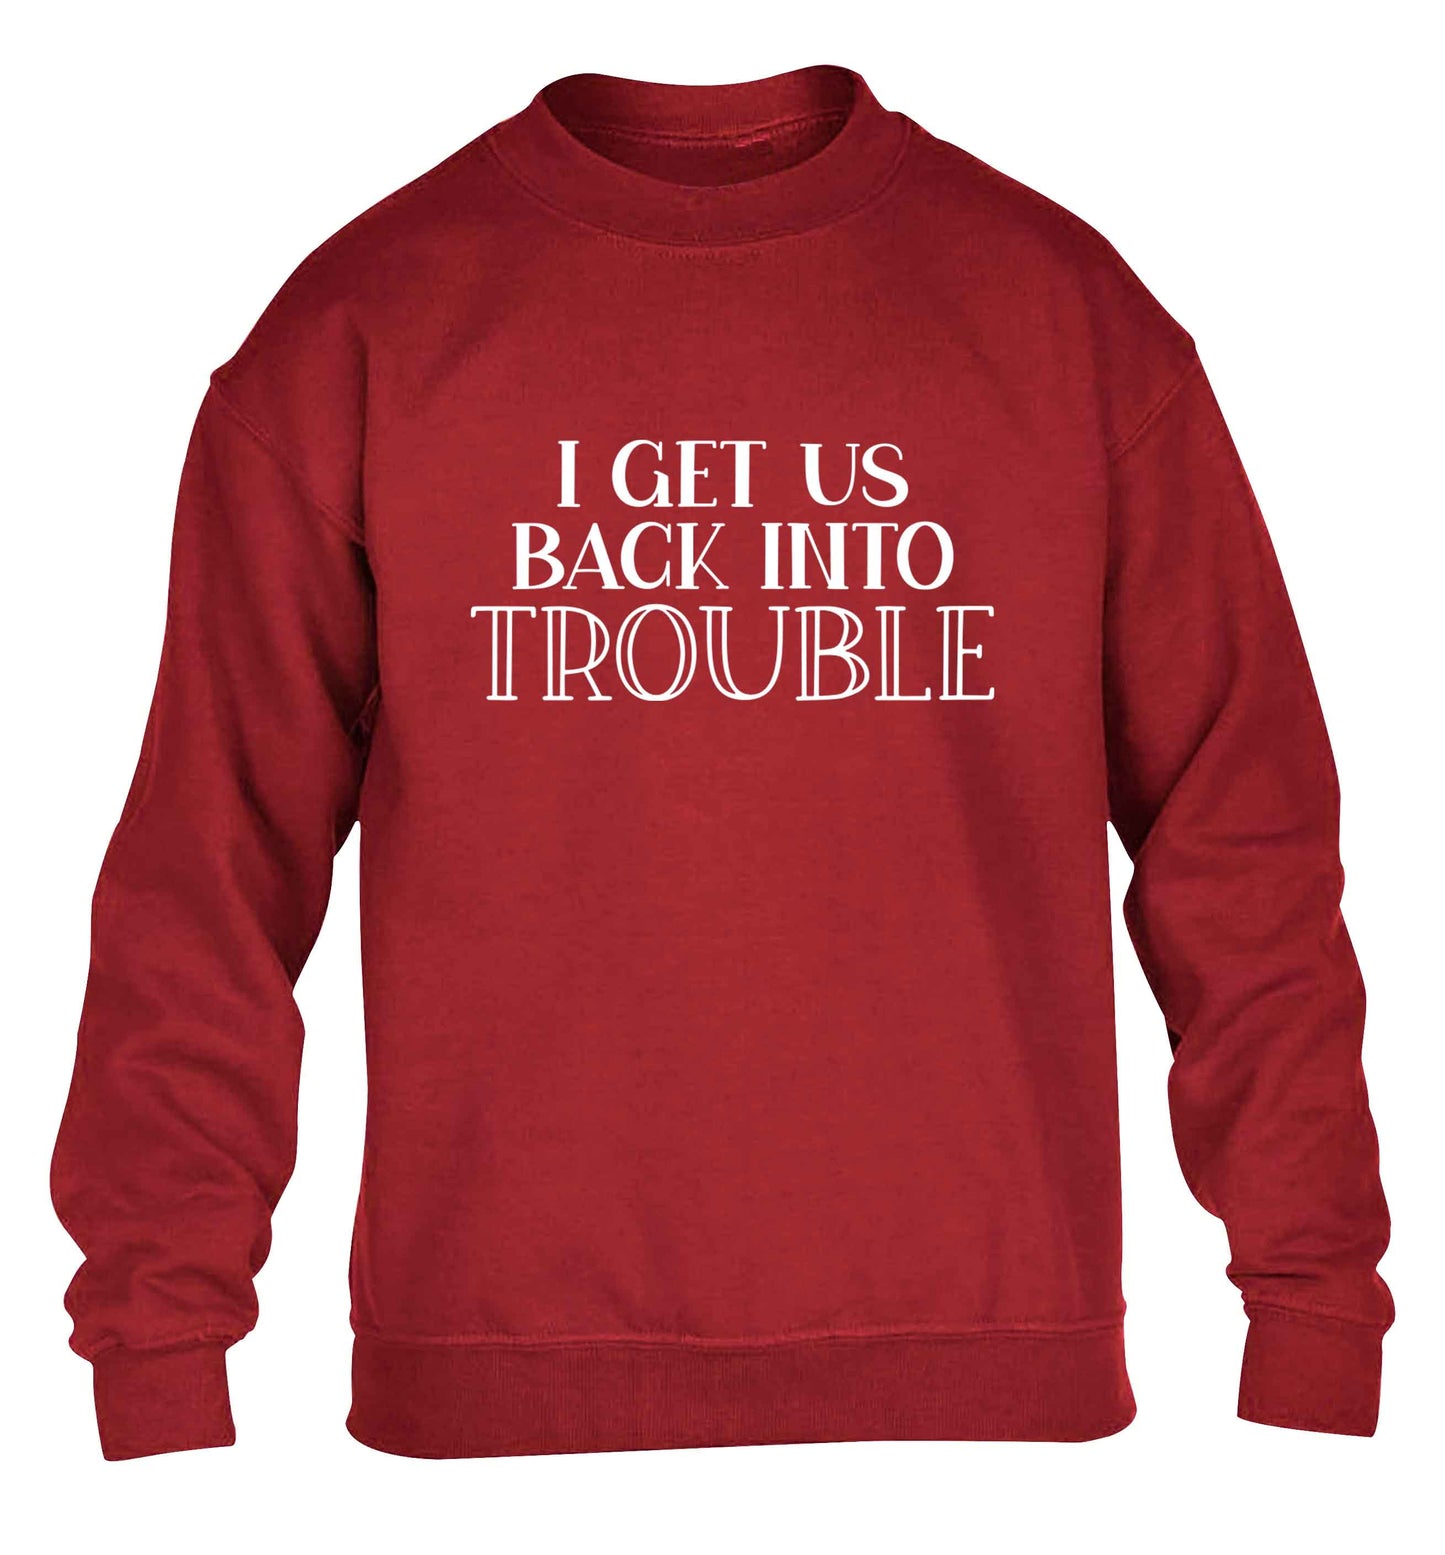 I get us back into trouble children's grey sweater 12-13 Years